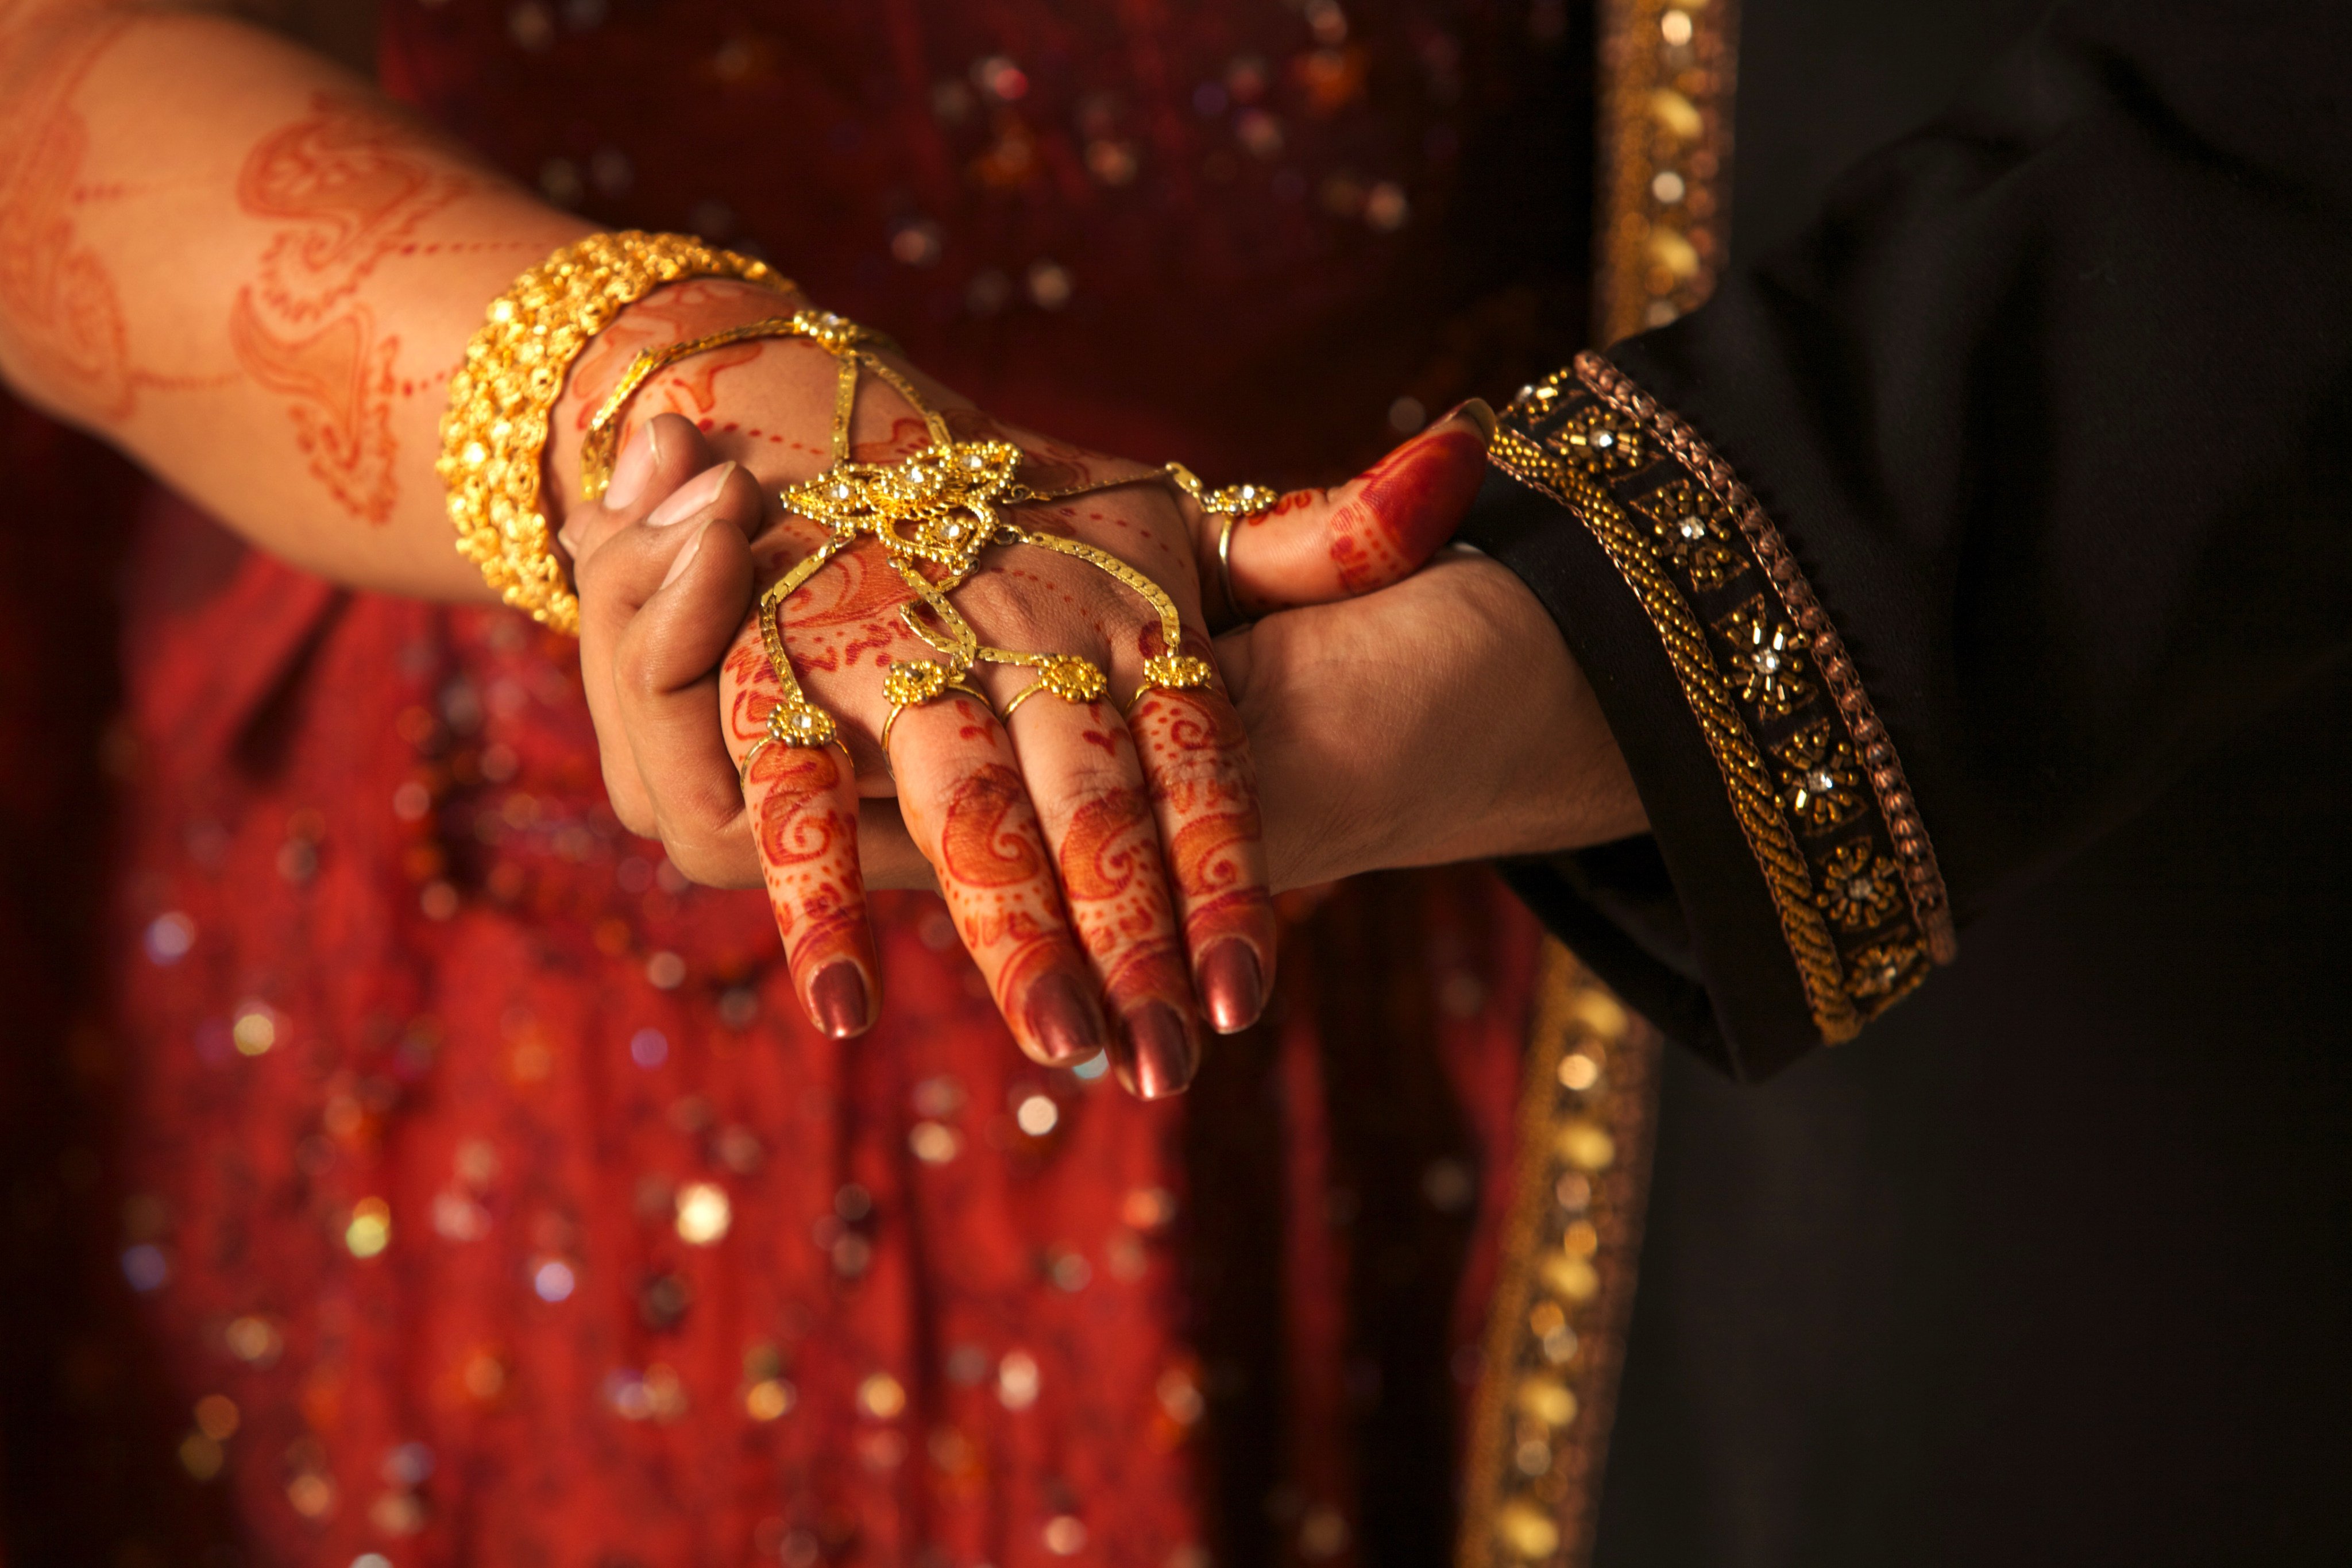 India holds more wedding ceremonies each year than any other country, with nearly 25 per cent of the global total. Photo: Shutterstock